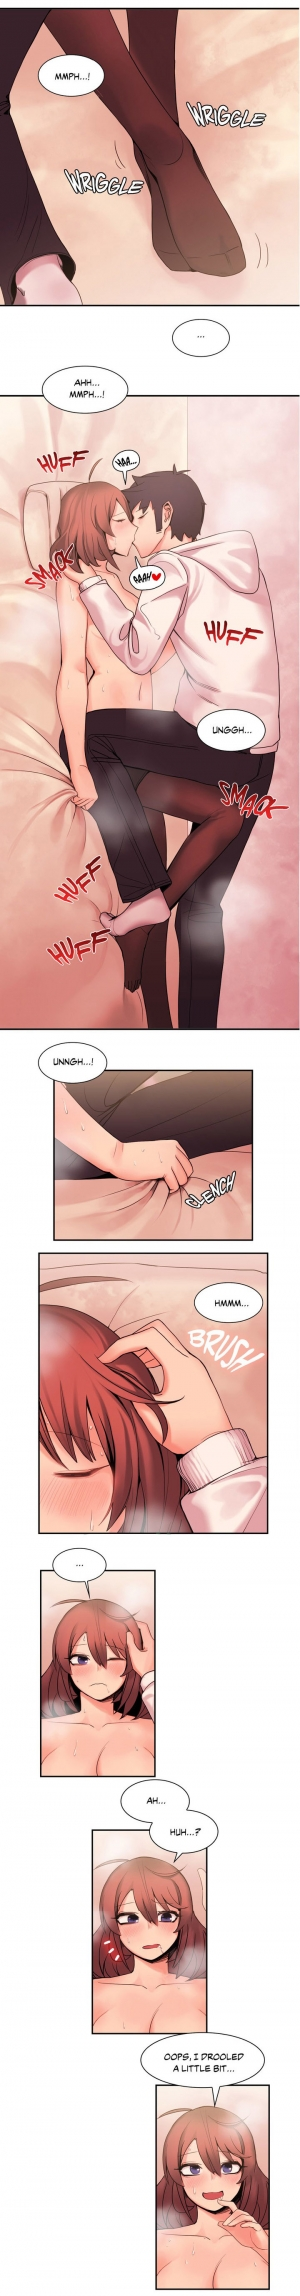 [Gaehoju, Gunnermul] The Girl That Got Stuck in the Wall Ch.11/11 [COMPLETED] [English] [Hentai Universe] - Page 130